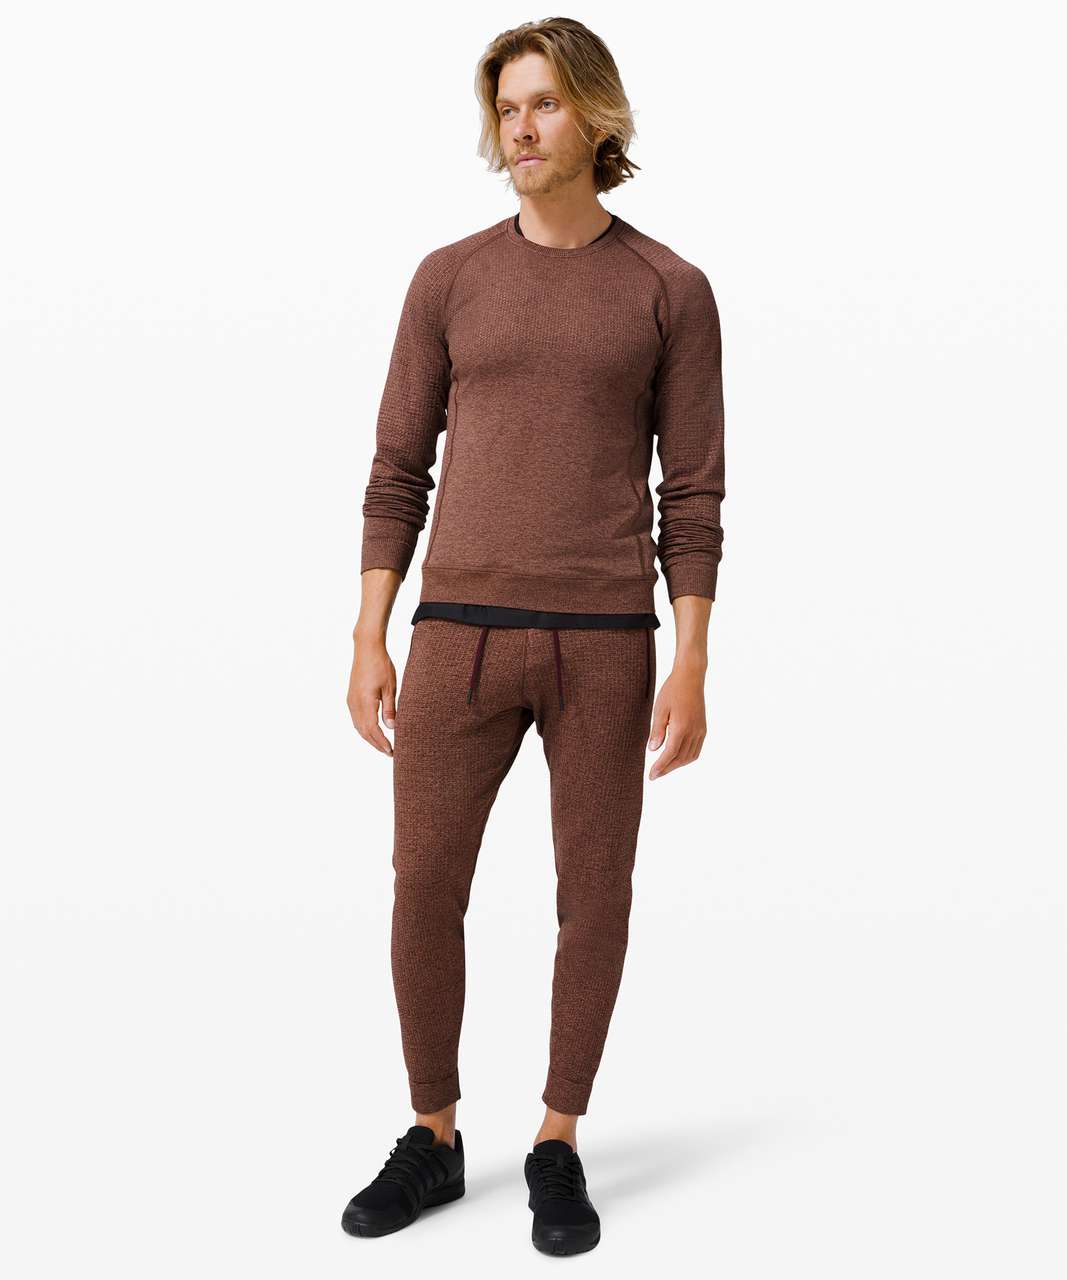 Lululemon Engineered Warmth Jogger - Ancient Copper / Cassis